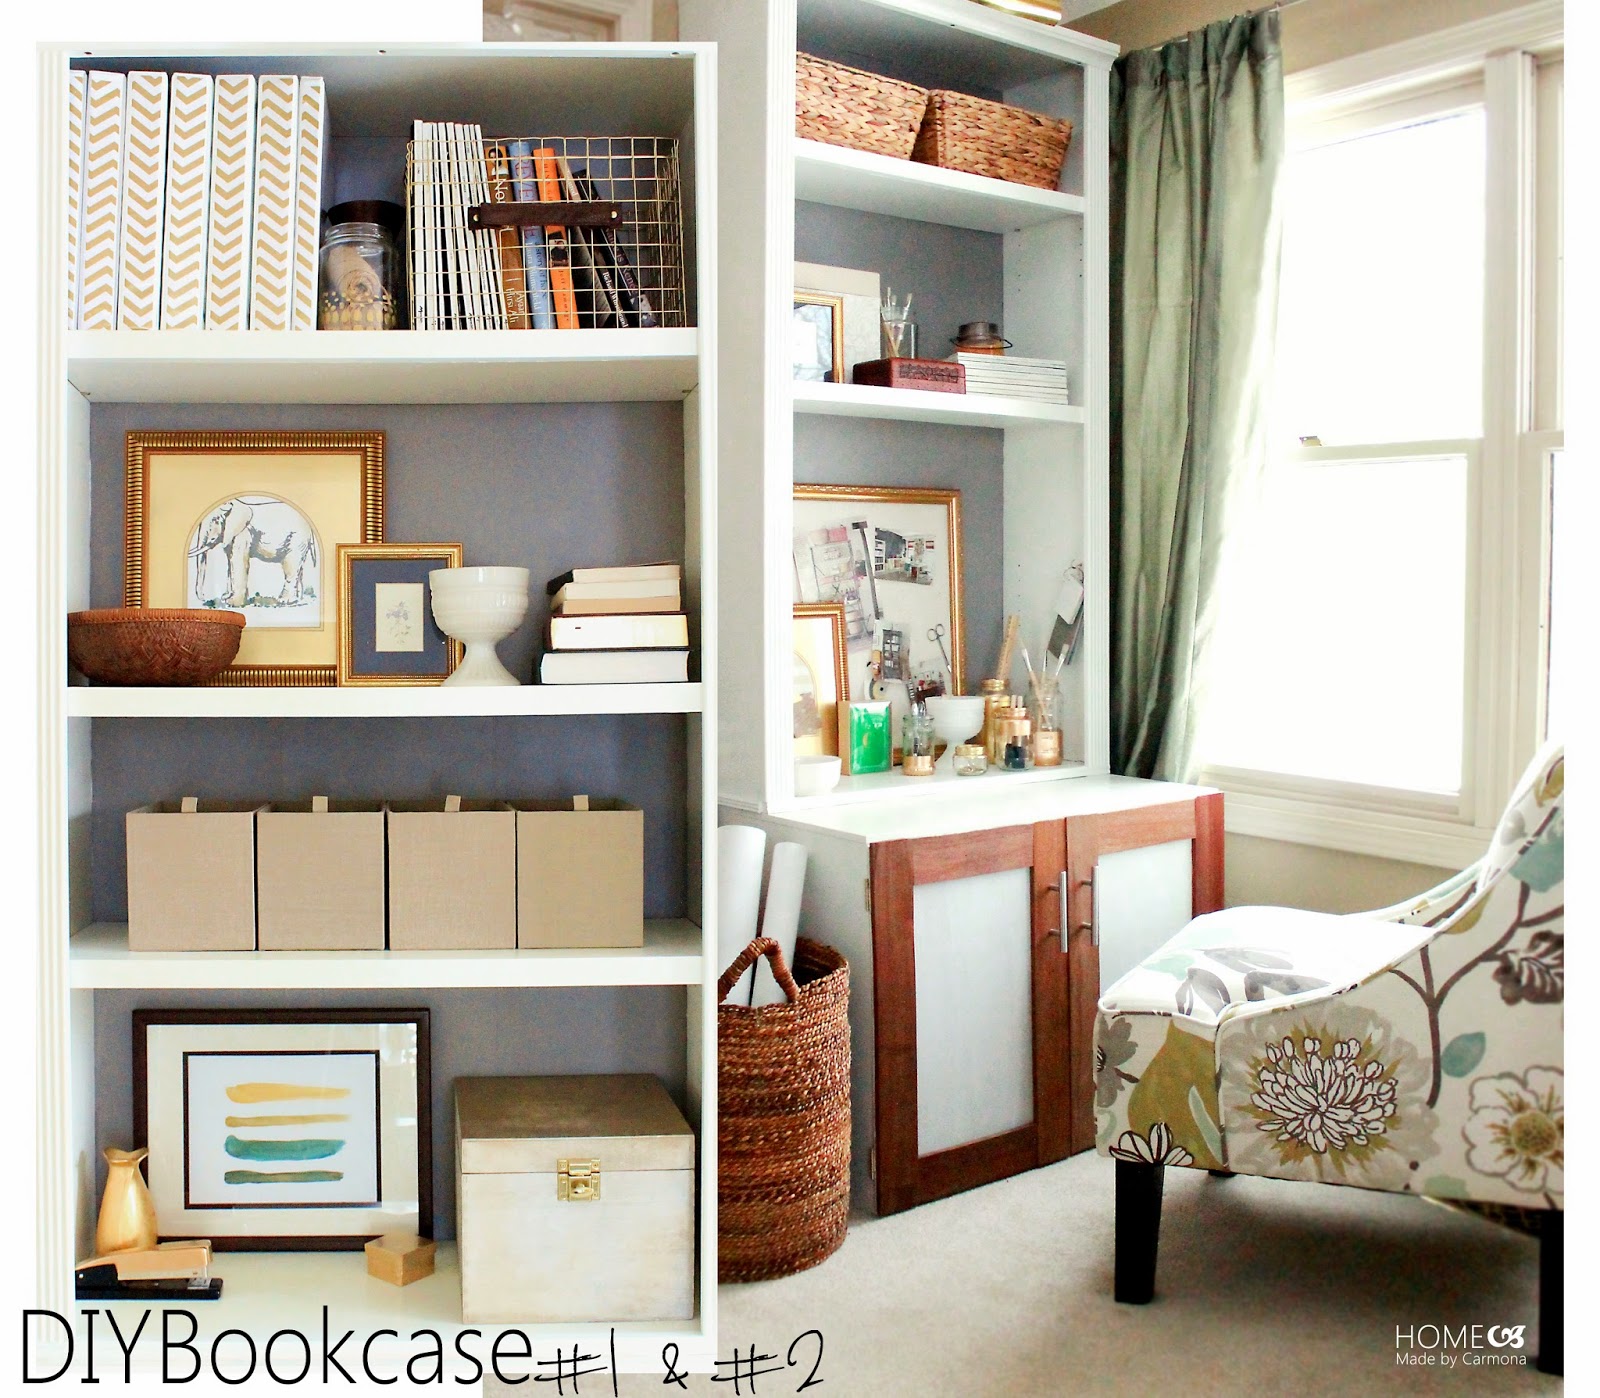 A Little Bookcase Styl'in {& A Big Makeover} | Home Made by Carmona